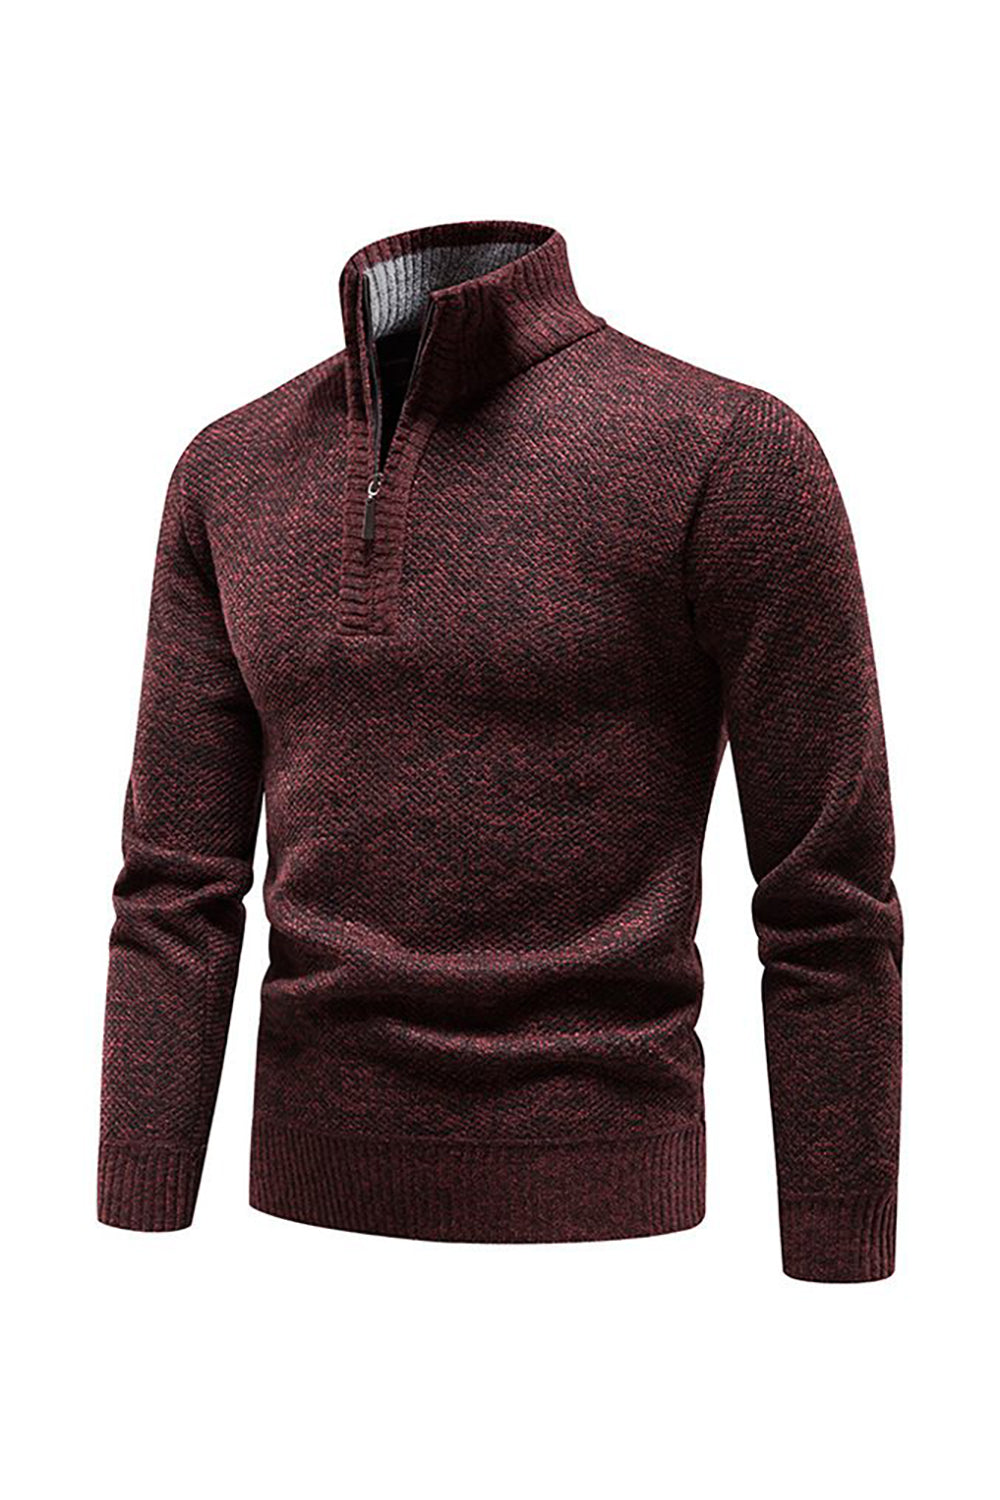 Burgundy Men's Casual Stand Collar Sweater